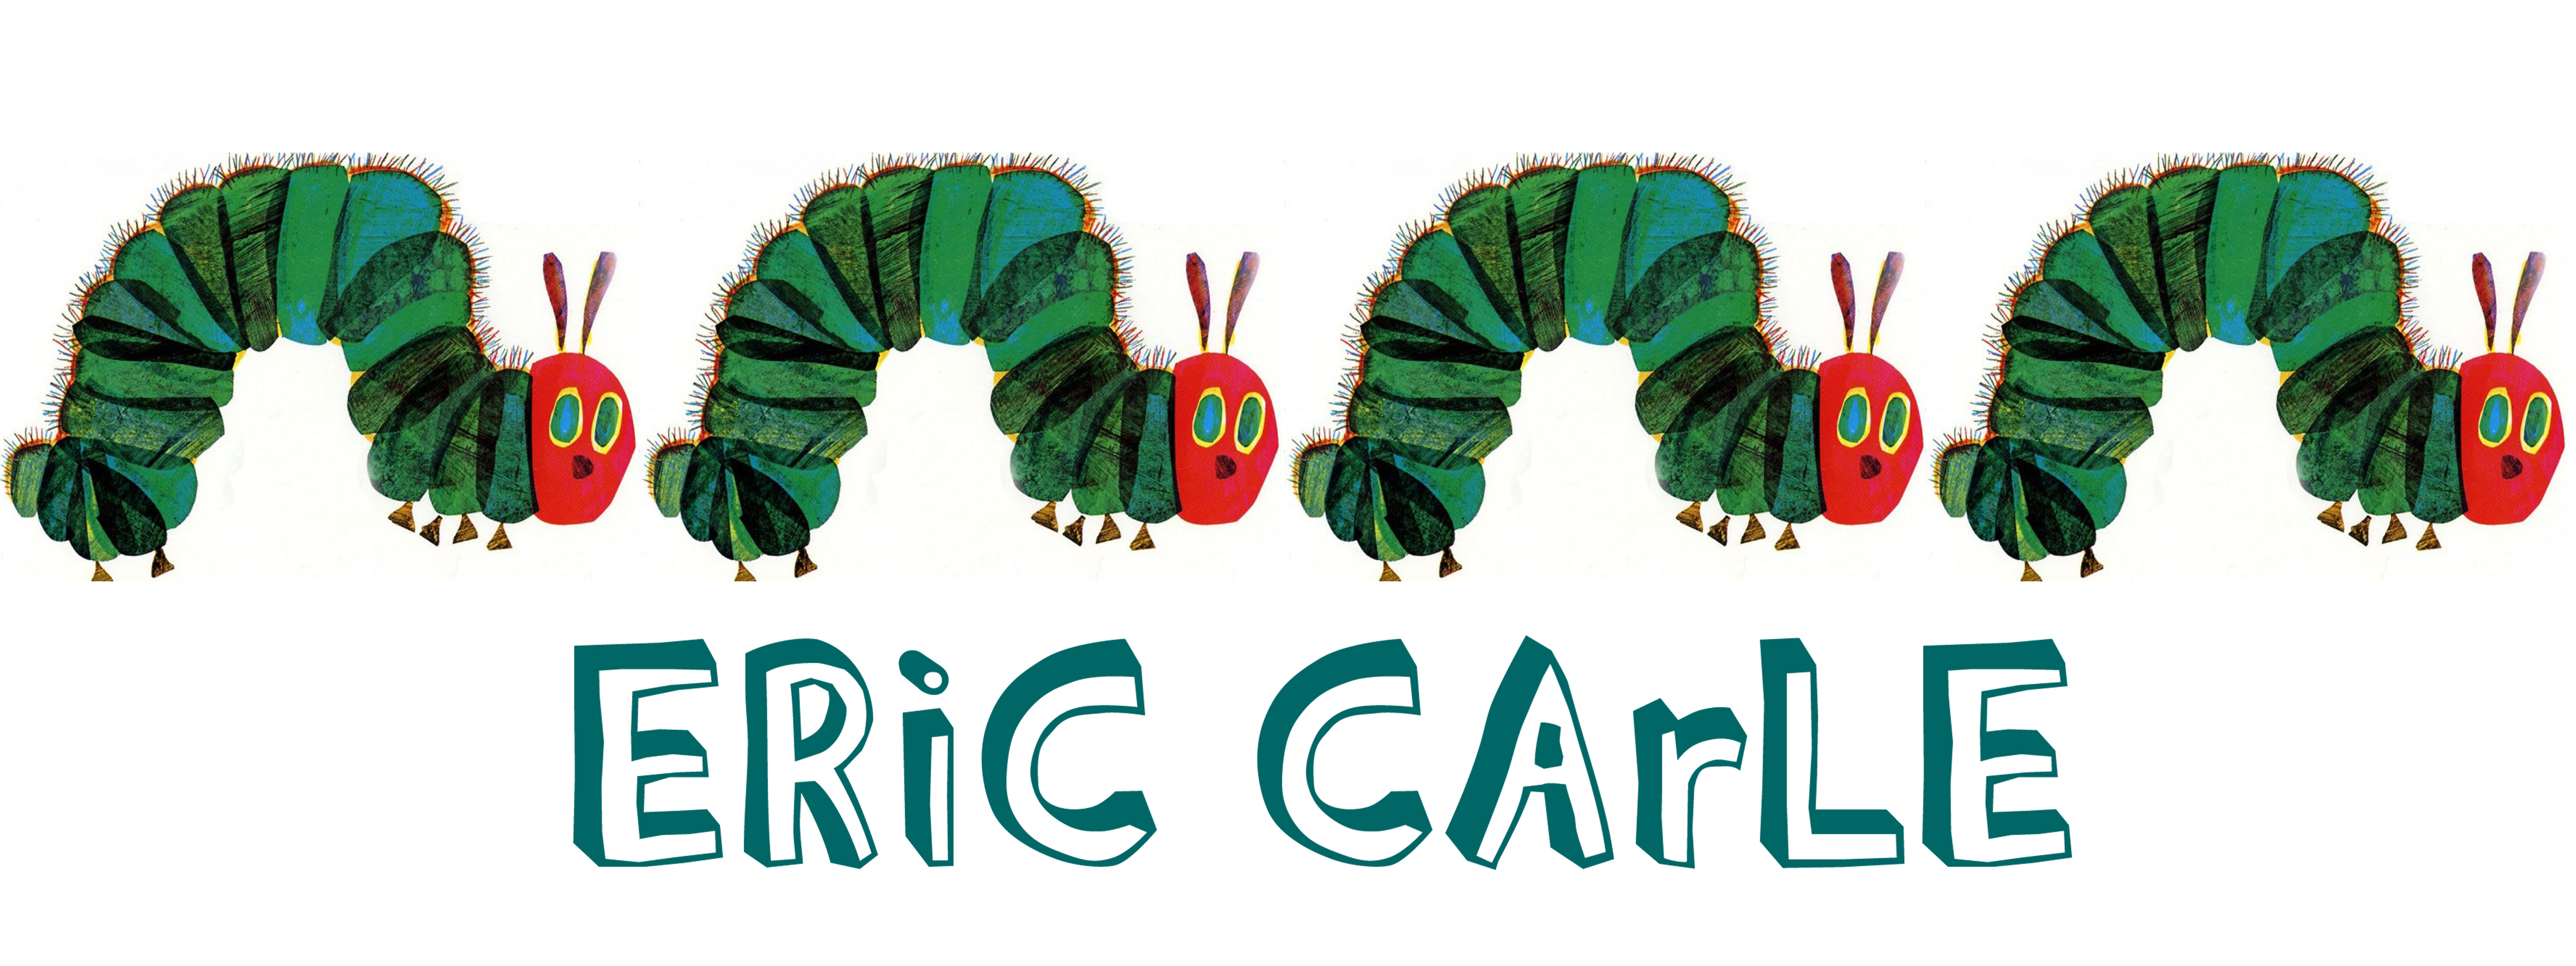 INSPIRATIONS FROM THE BOOKSHELF Eric Carle - Words&Pictures